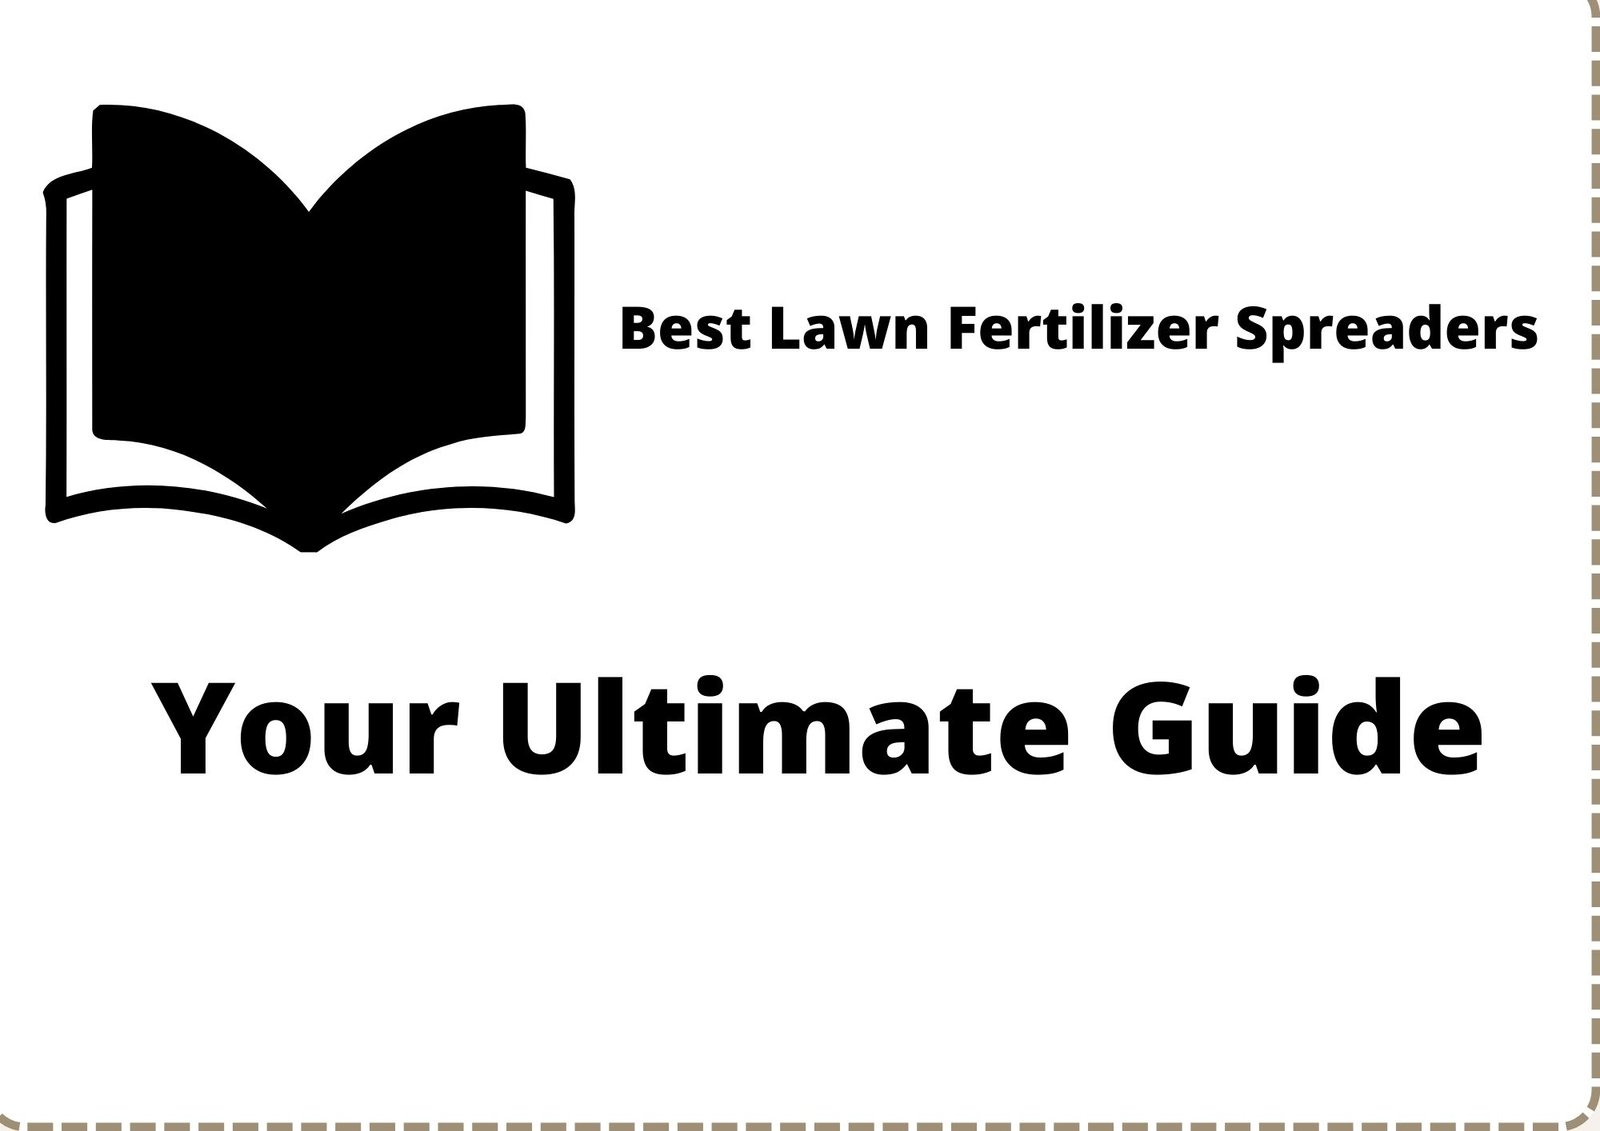 best lawn fetilizer spreaders - your ultimate guide